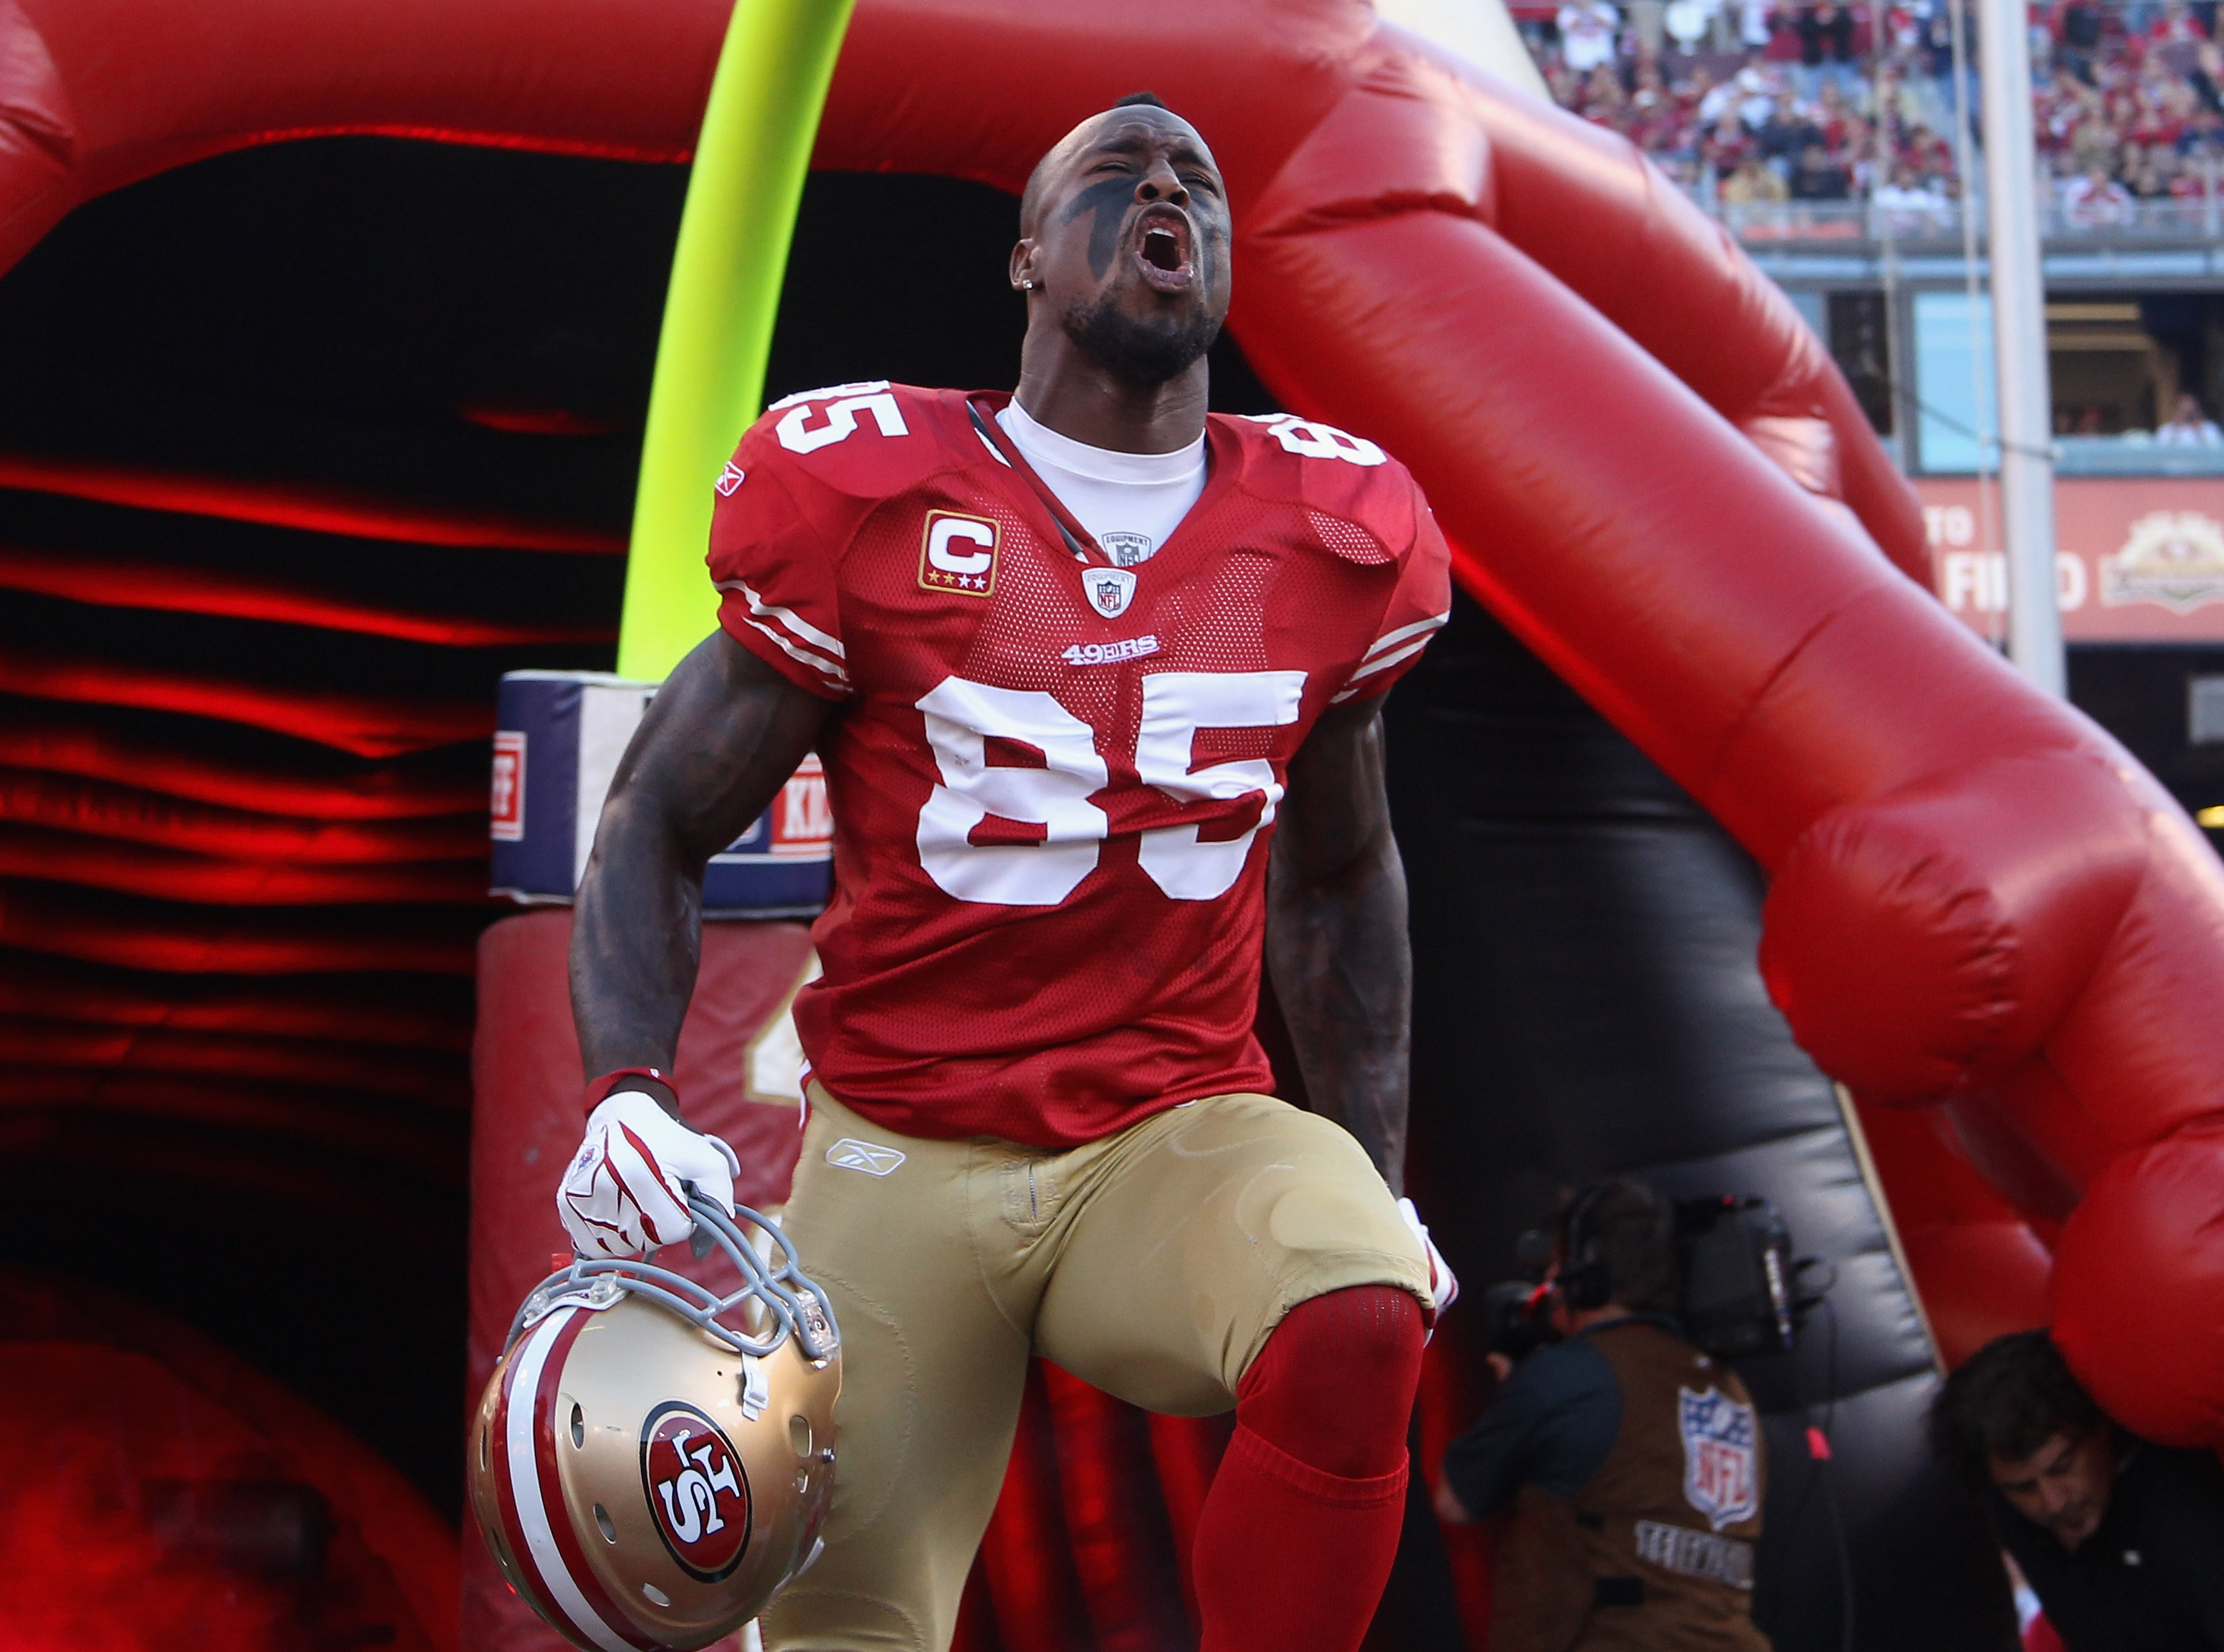 SAN FRANCISCO - SEPTEMBER 20:  Vernon Davis #85 of the San Francisco 49ers runs on to the field for their game against the New Orleans Saints at Candlestick Park on September 20, 2010 in San Francisco, California.  (Photo by Ezra Shaw/Getty Images)